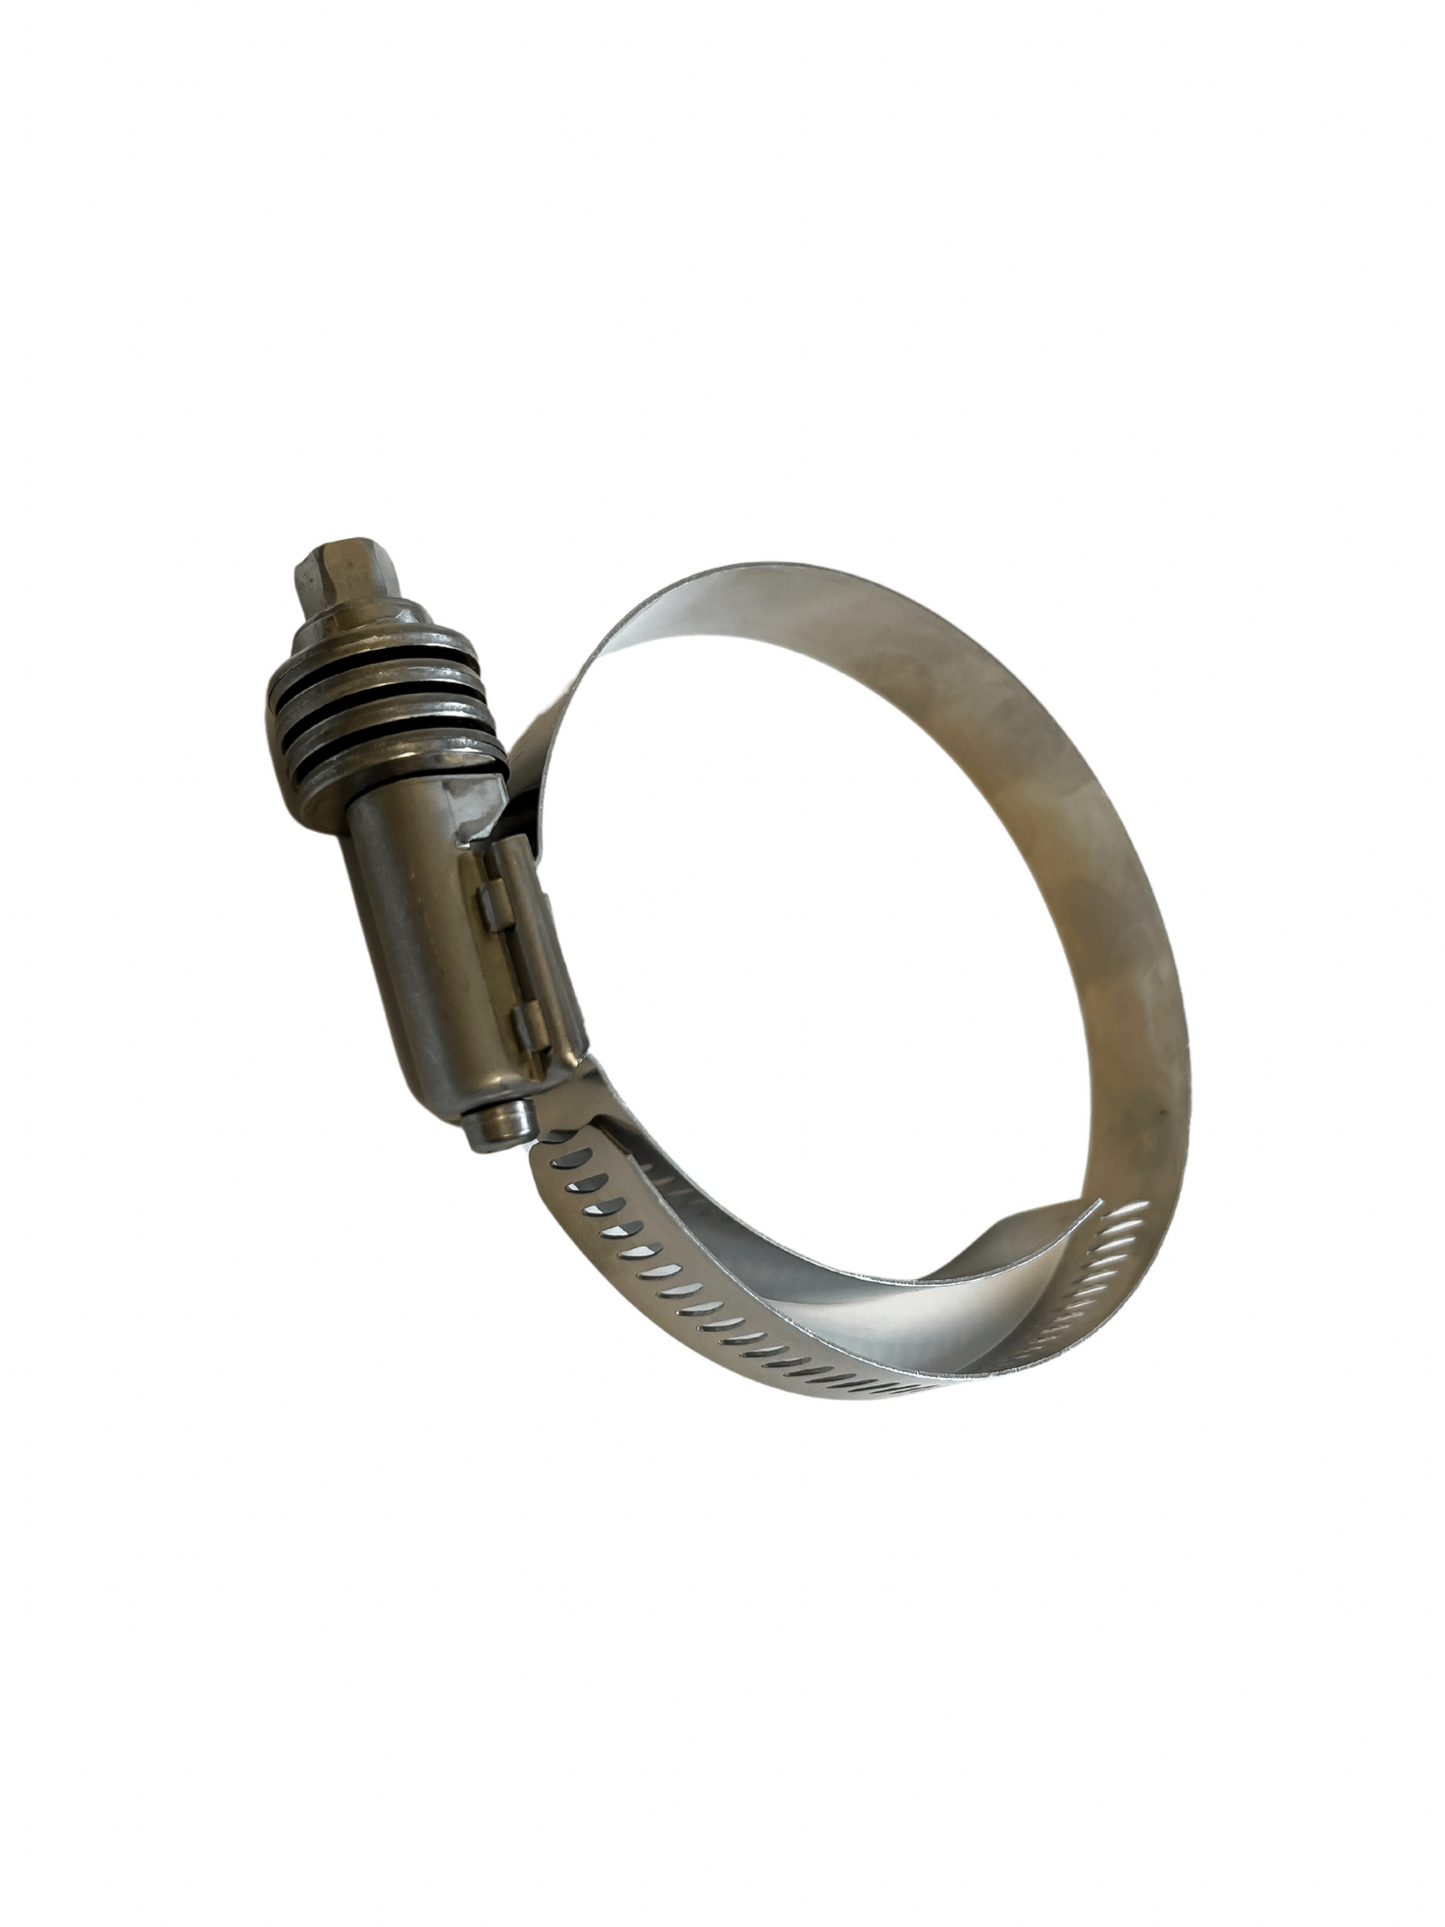 Breeze CT-9440 Aero-Seal Constant Torque Liner Clamp with Stainless Screw Effective Diameter Range: 2-1/16" - 3" - USA Supply